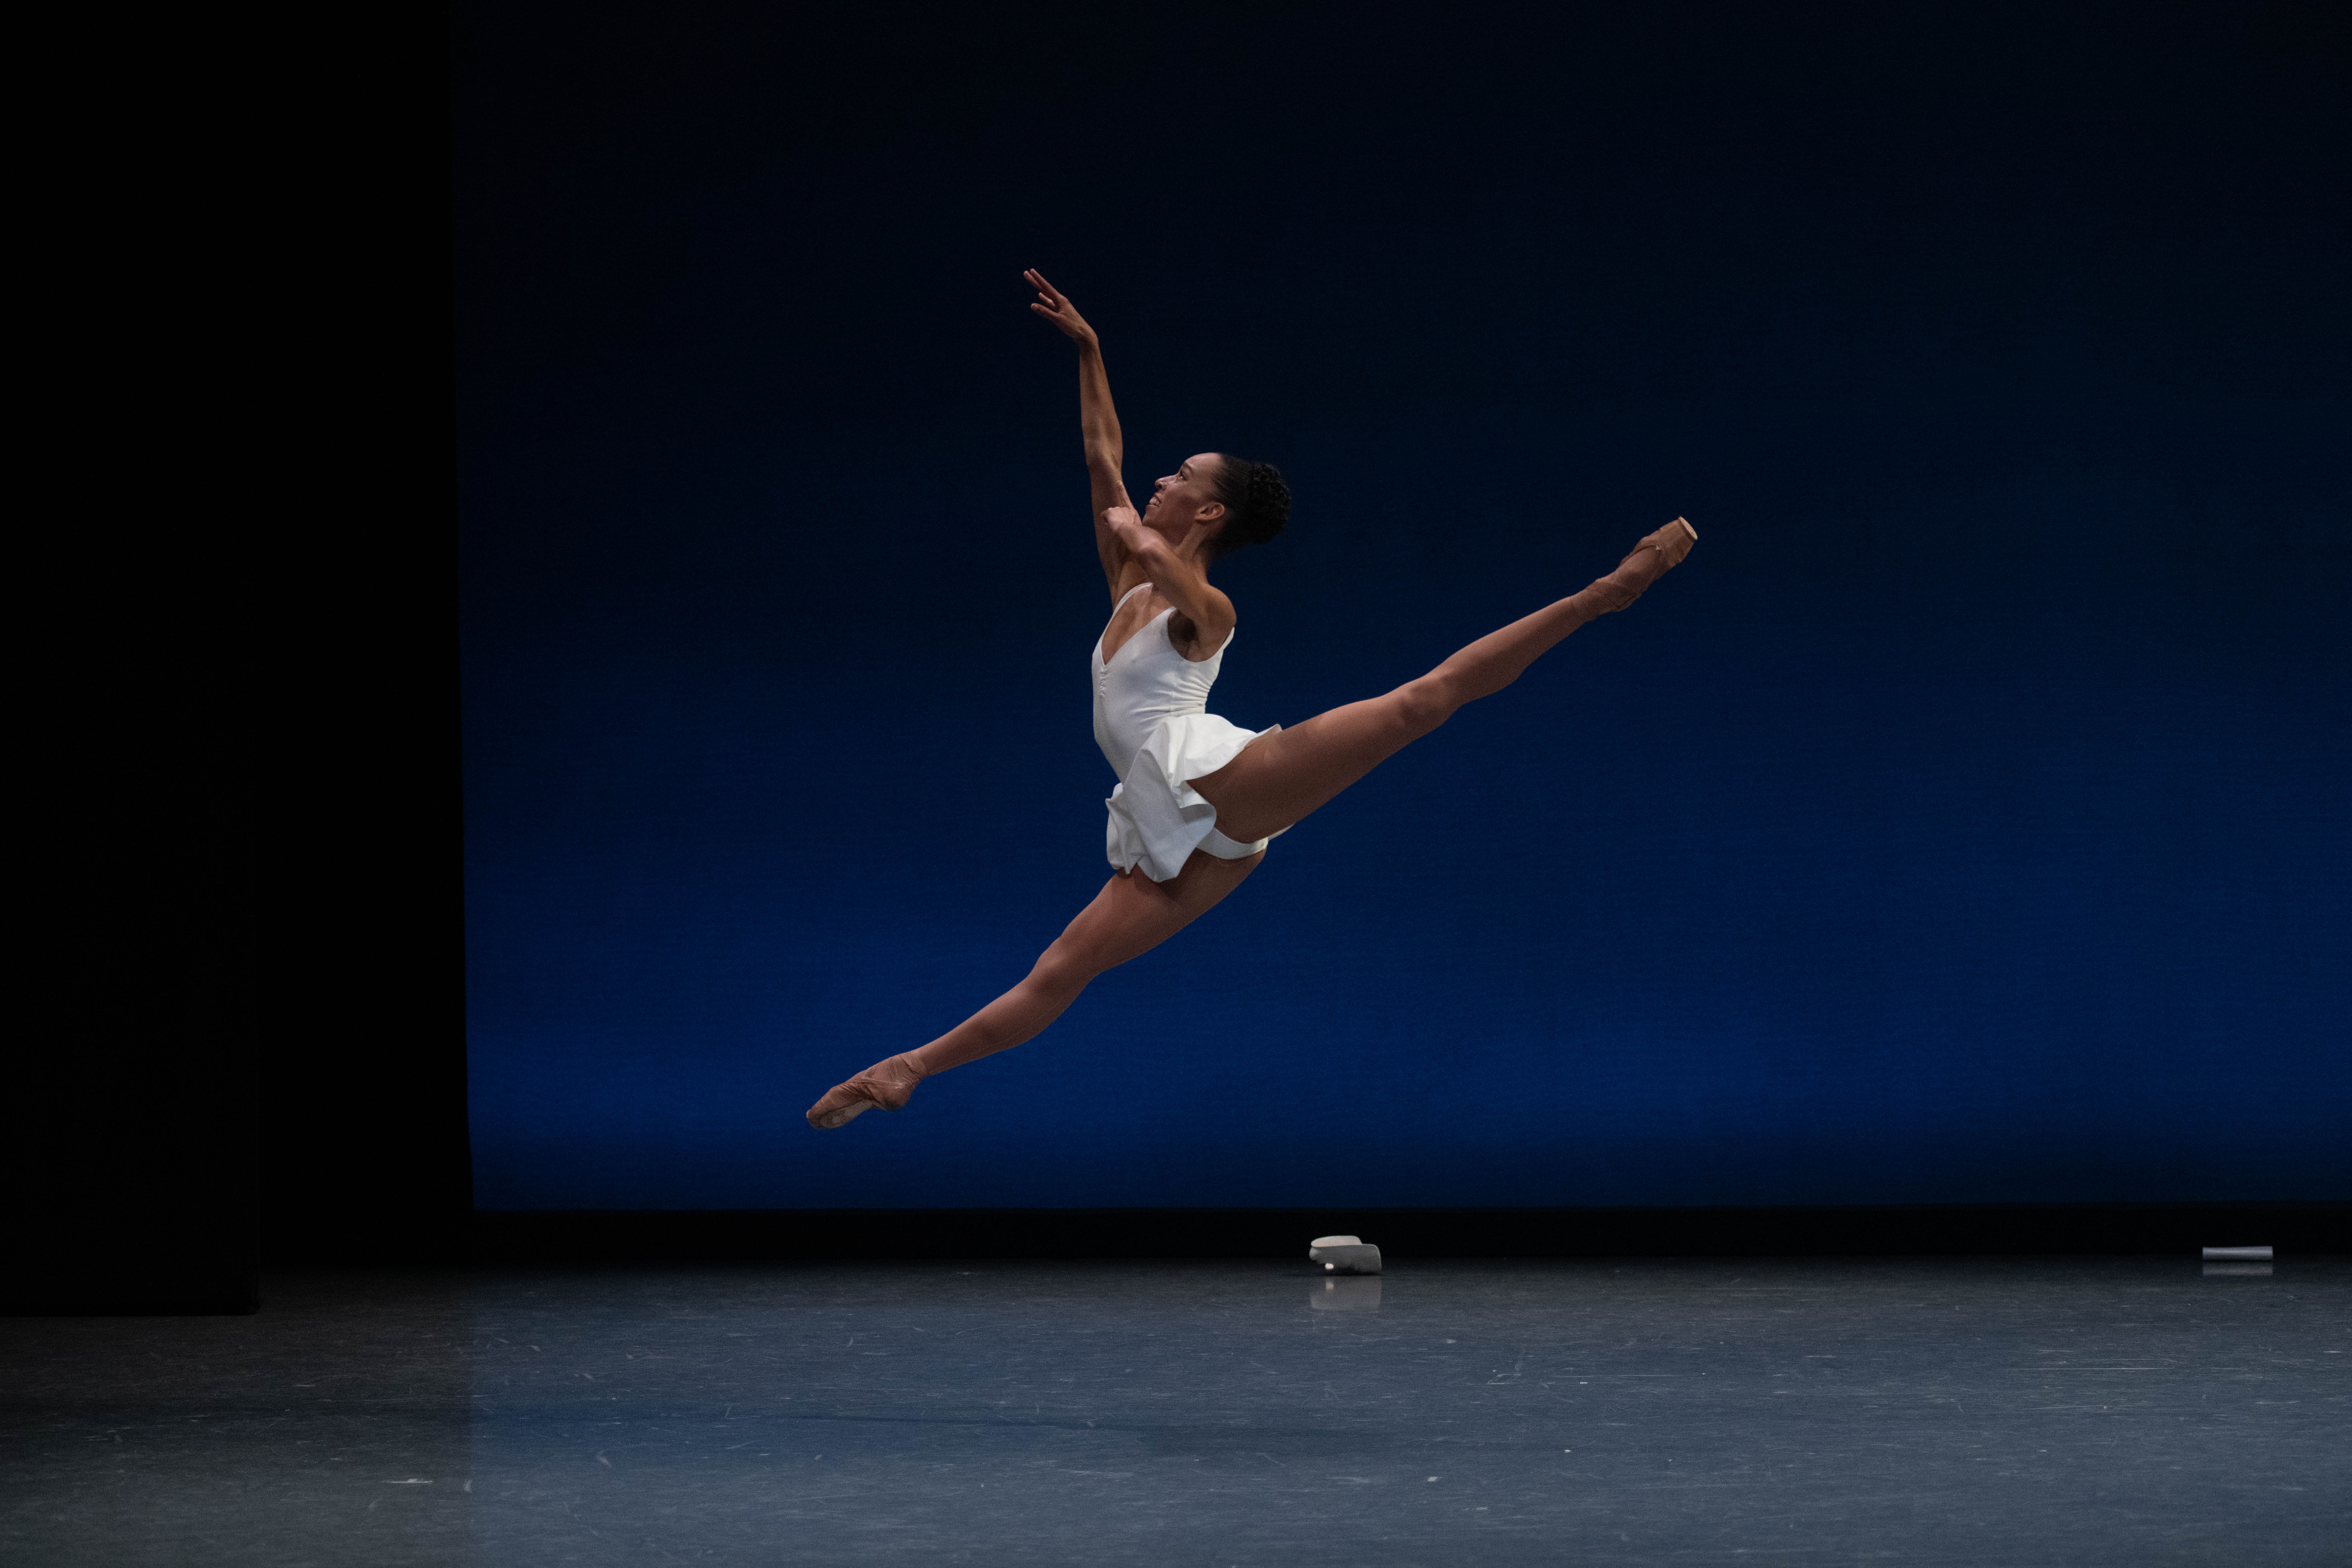 On a bare stage, Chyrystn Fentroy is caught mid-leap, her back leg above 90 and her front leg just below. Her downstage hand touches her upstage shoulder, with the upstage arm extended high. She wears a white tunic over tights and pointe shoes matching her skin tone.